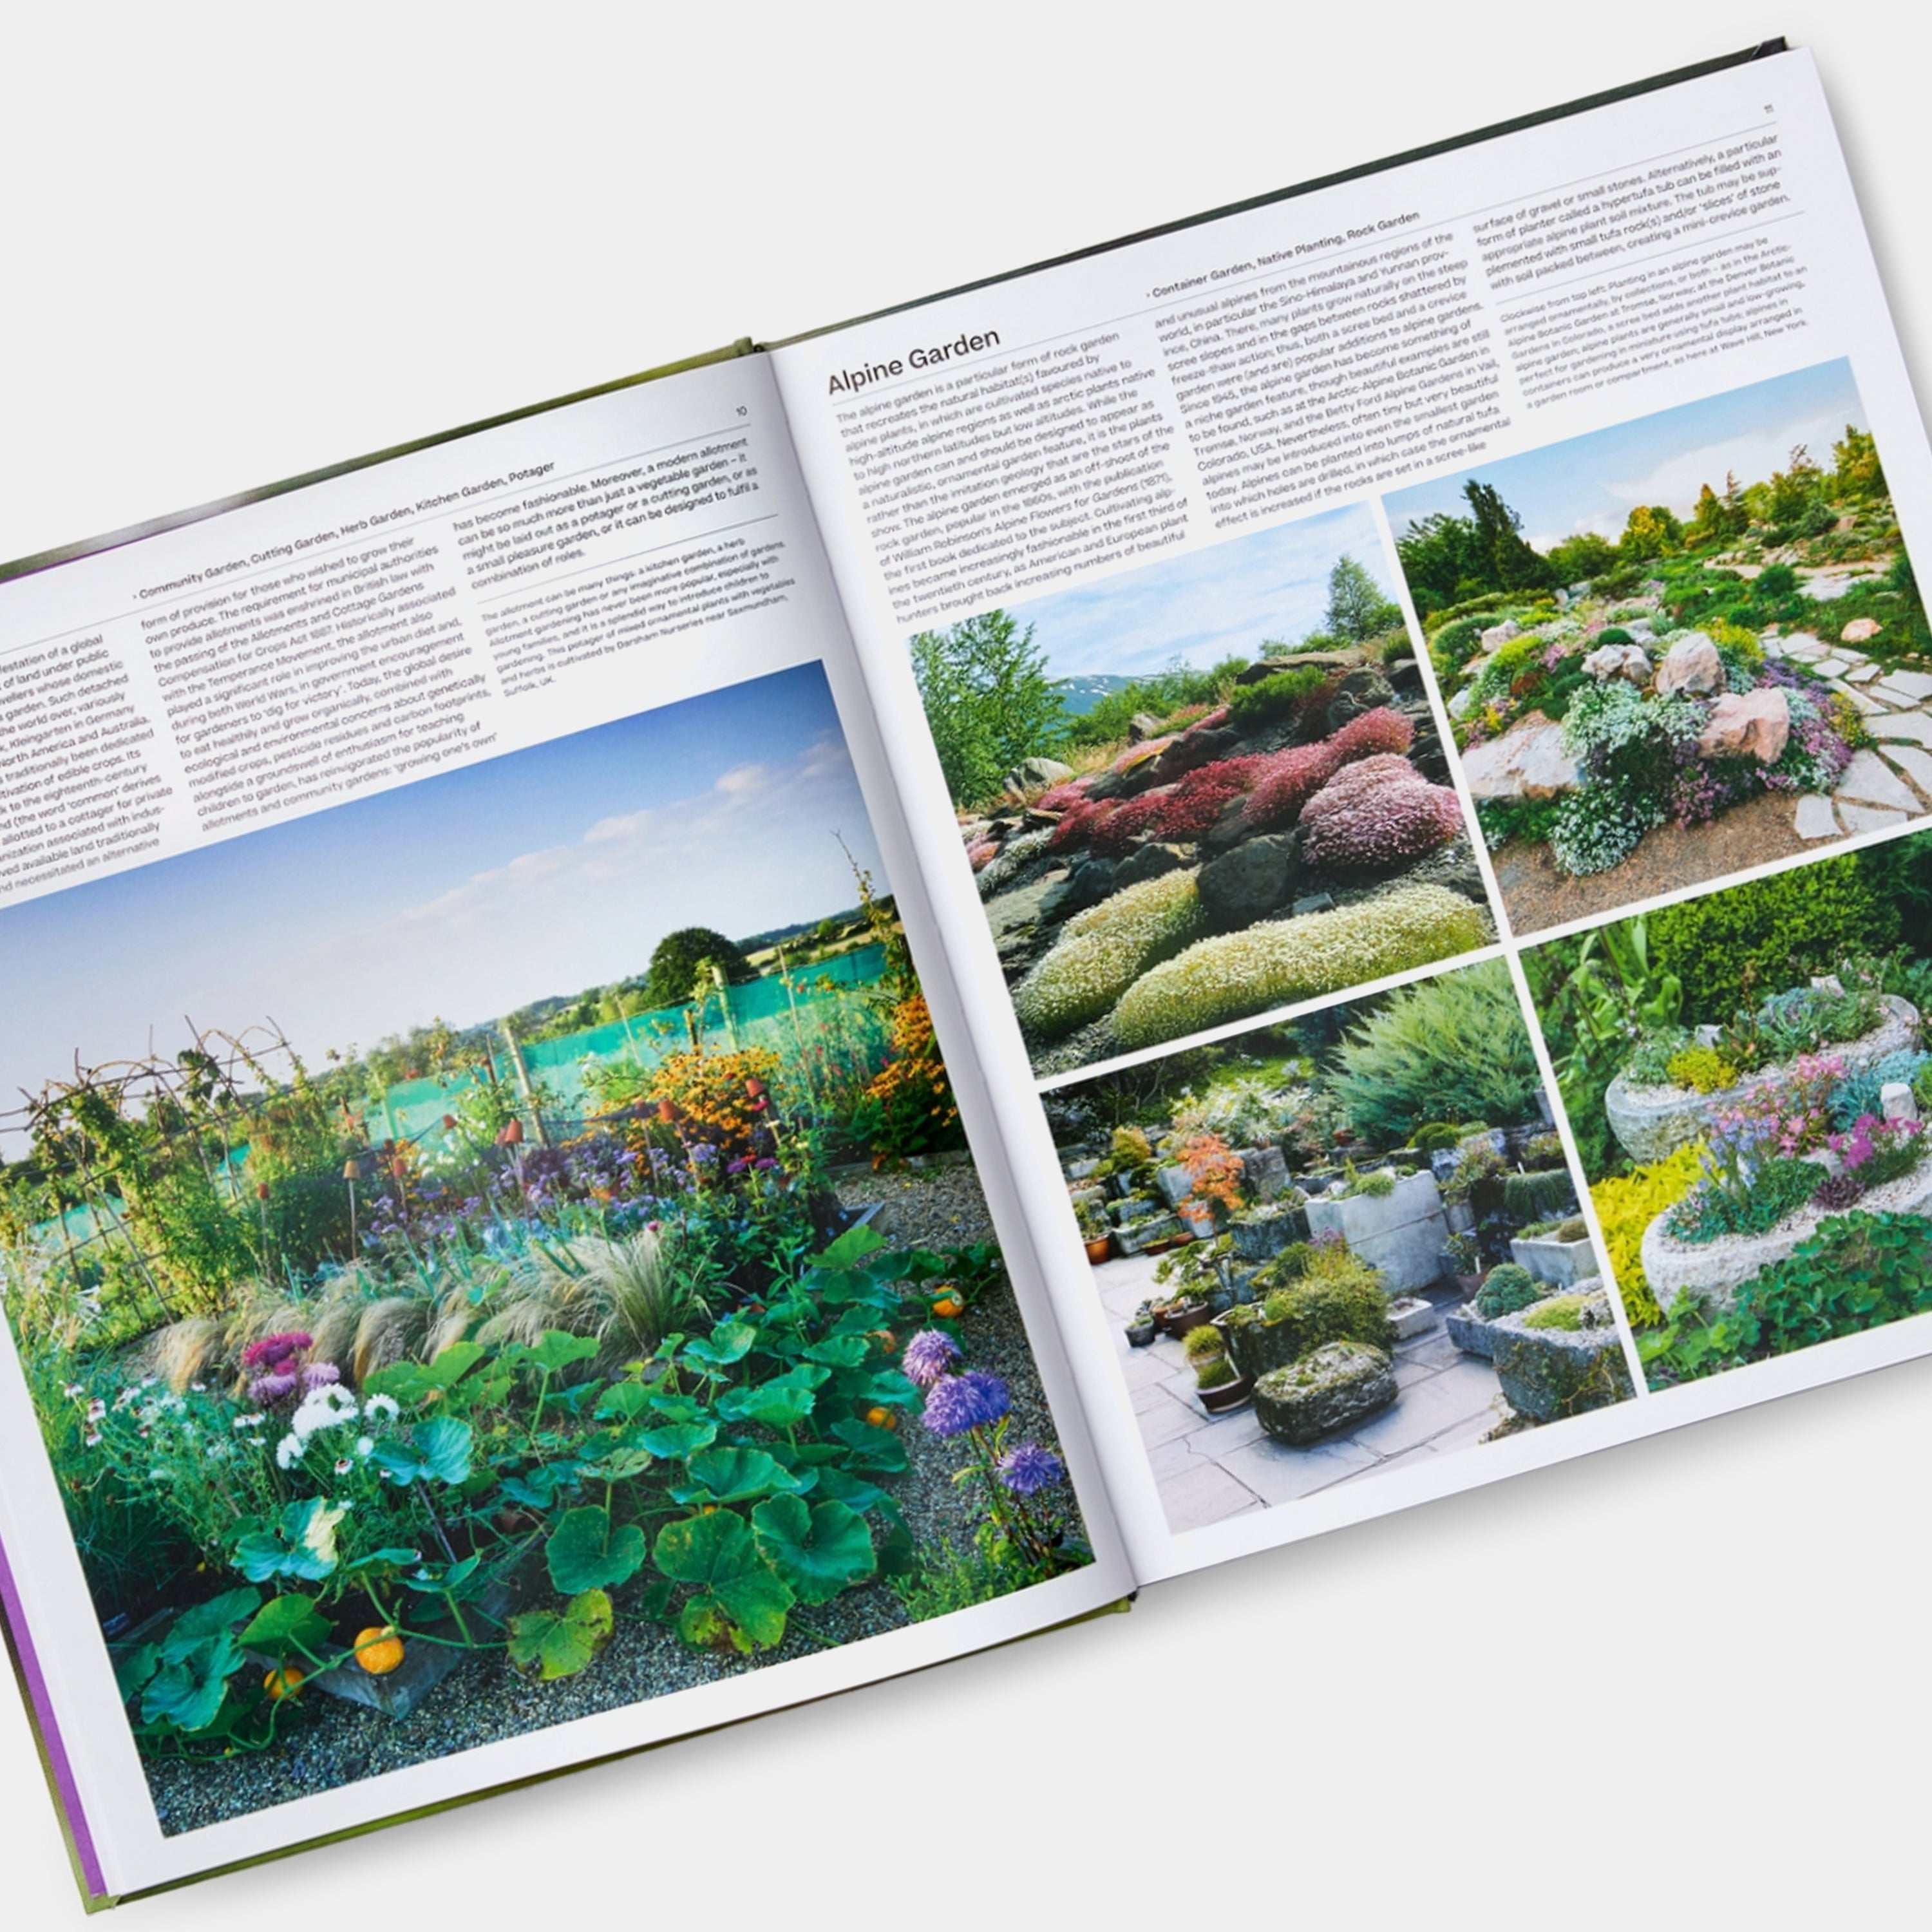 The Garden: Elements and Styles Phaidon Book